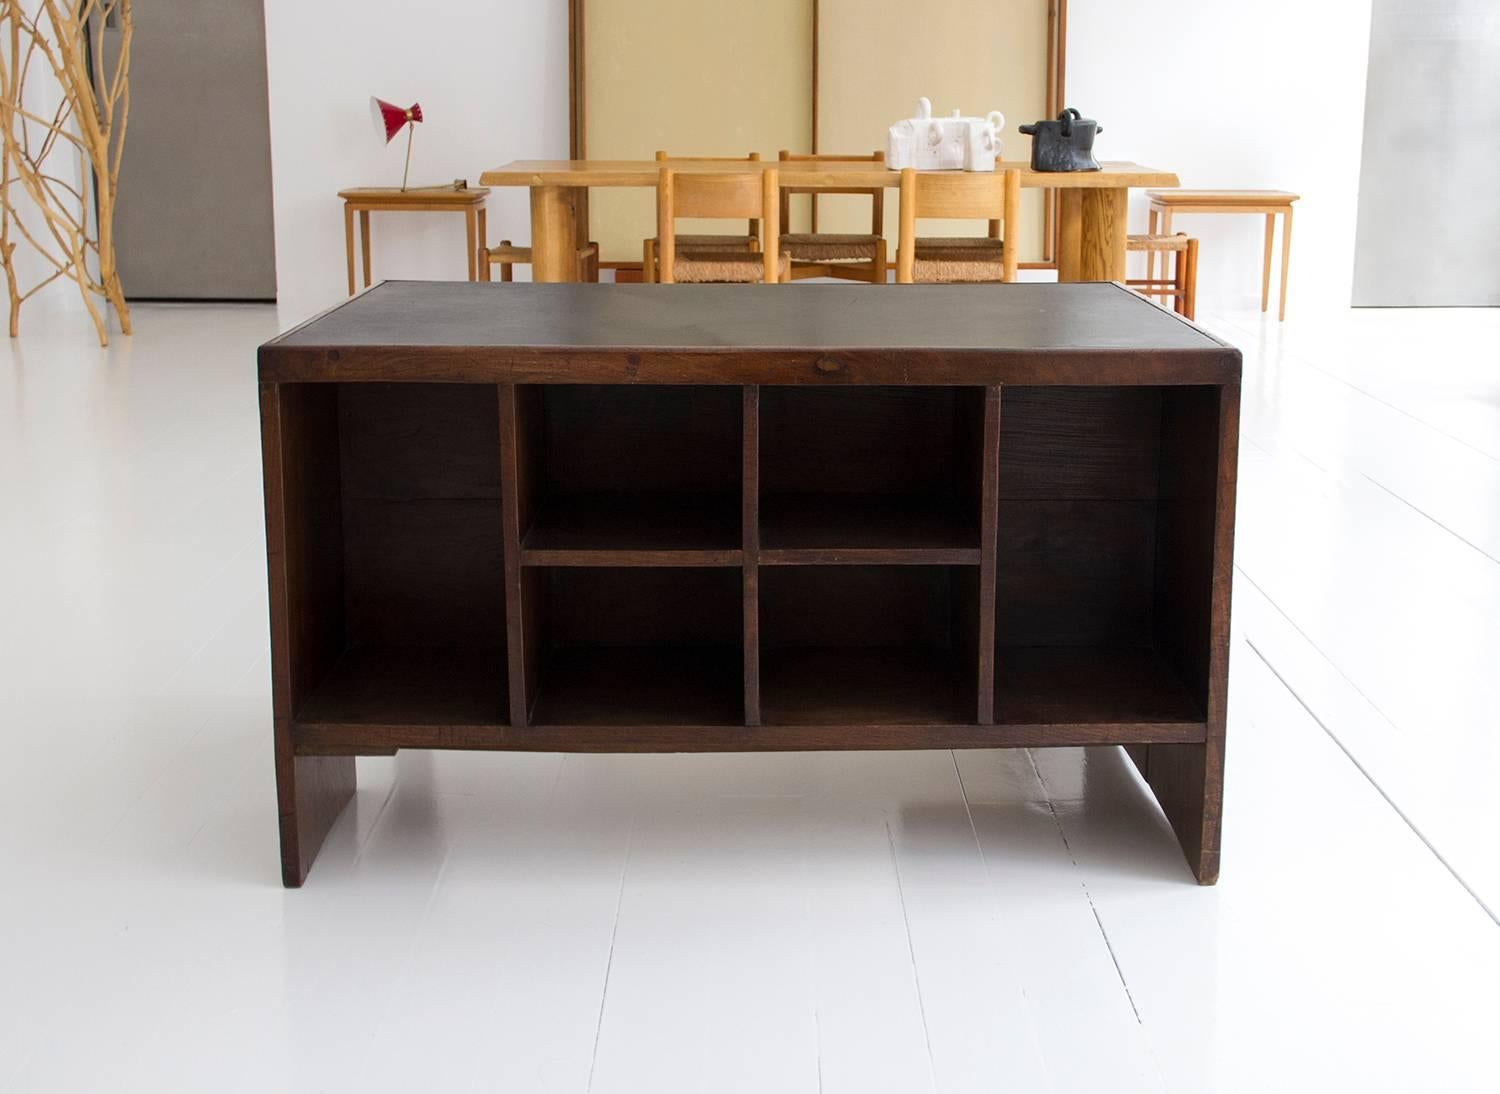 'Office table' desk with bookcase, model no. PJ-BU-02-A, designed for the Secretariat and administrative buildings in Chandigarh. Made of Indian rosewood, black leather and aluminium. Drawer element on front and six open compartments on rear.